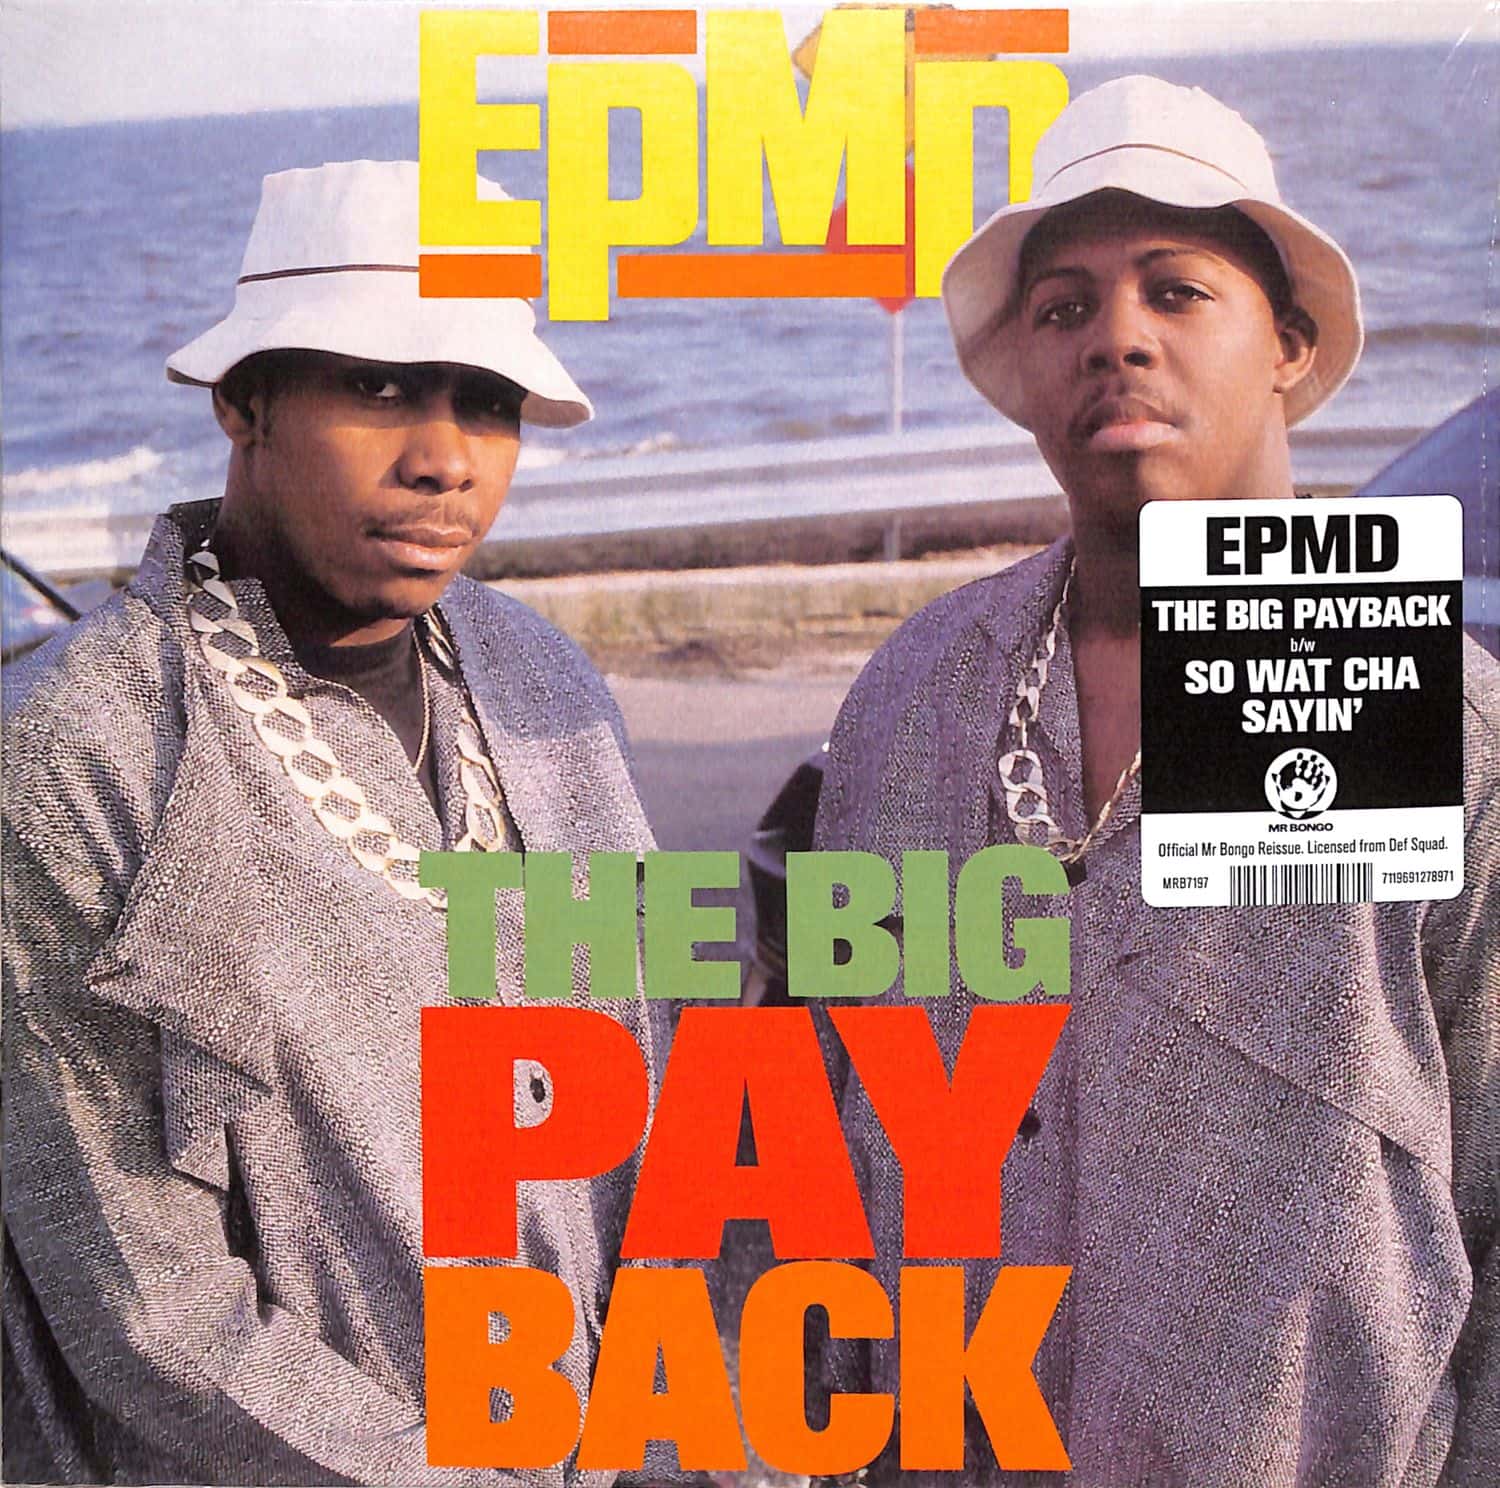 EPMD - THE BIG PAYBACK 